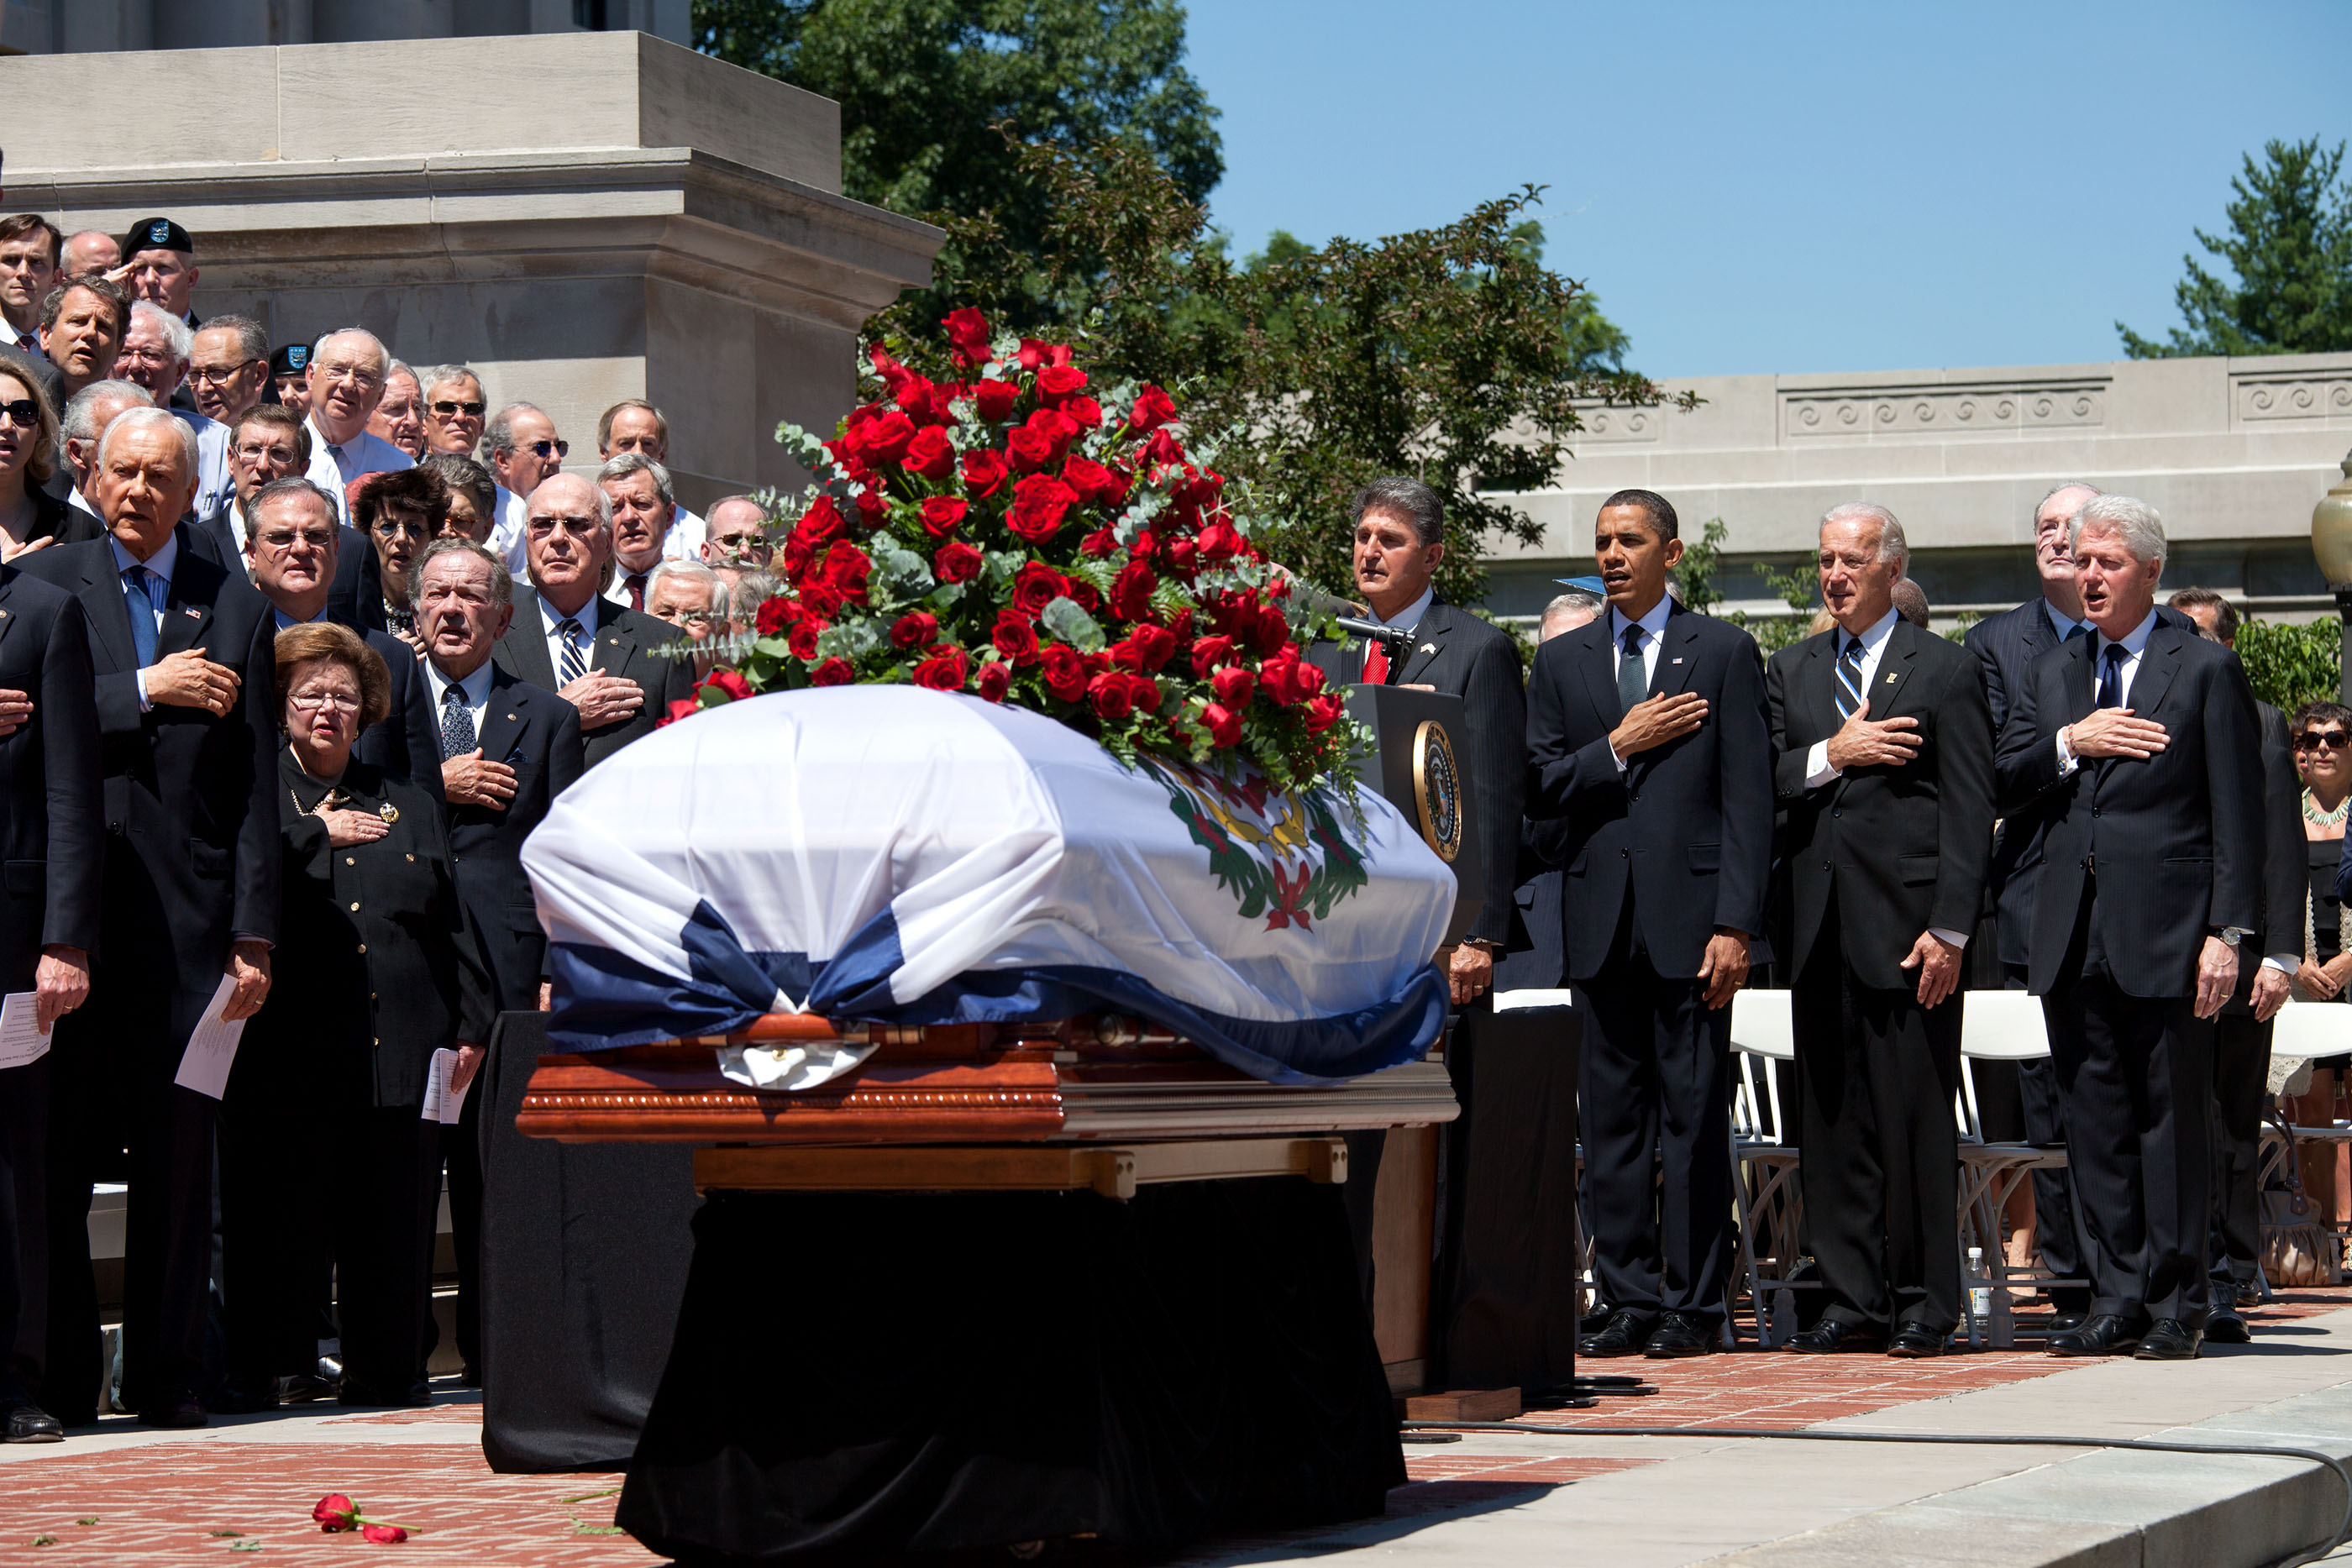 West Virginia, June 28, 2010. Celebrating the life of Sen. Robert C. Byrd, with the Vice President and former President Clinton, at a memorial service in Charleston. (Official White House Photo by Pete Souza)